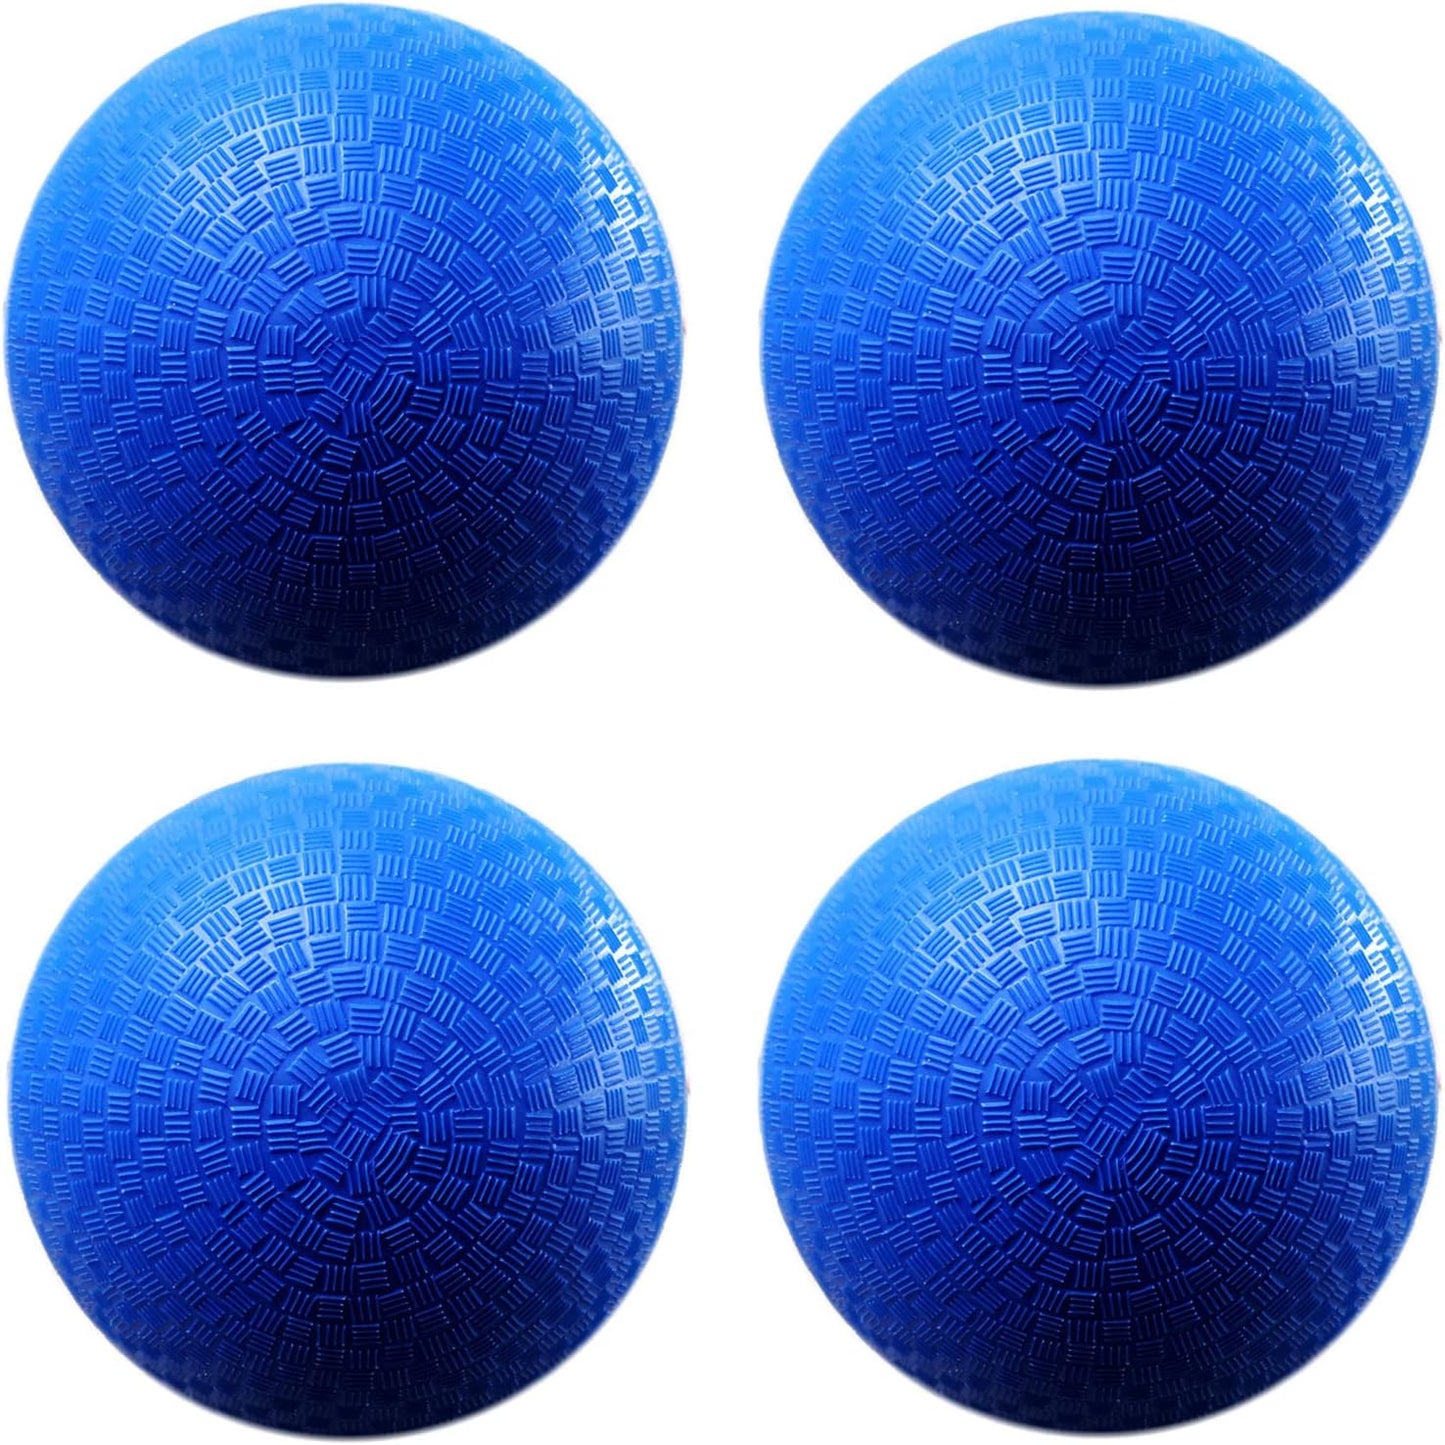 8.5-Inch Dodgeball Playground Balls, Pack of 4 Balls with 1 Pump, Official Size for Dodge Ball, Handball, Camps and Schools